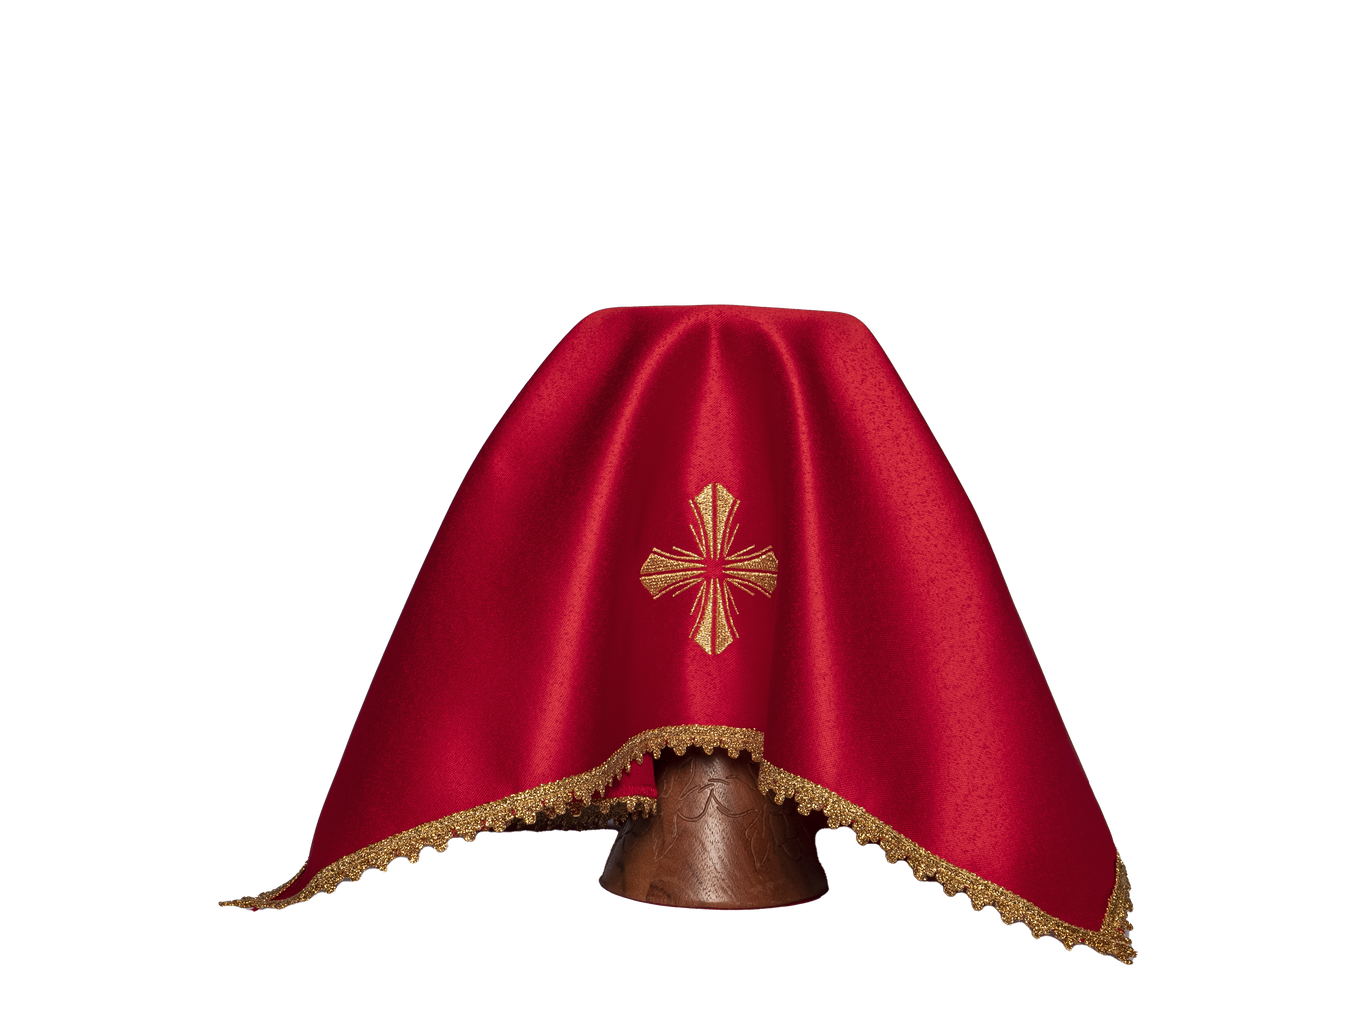 Chalice veils in 4 liturgical colors with gold cross